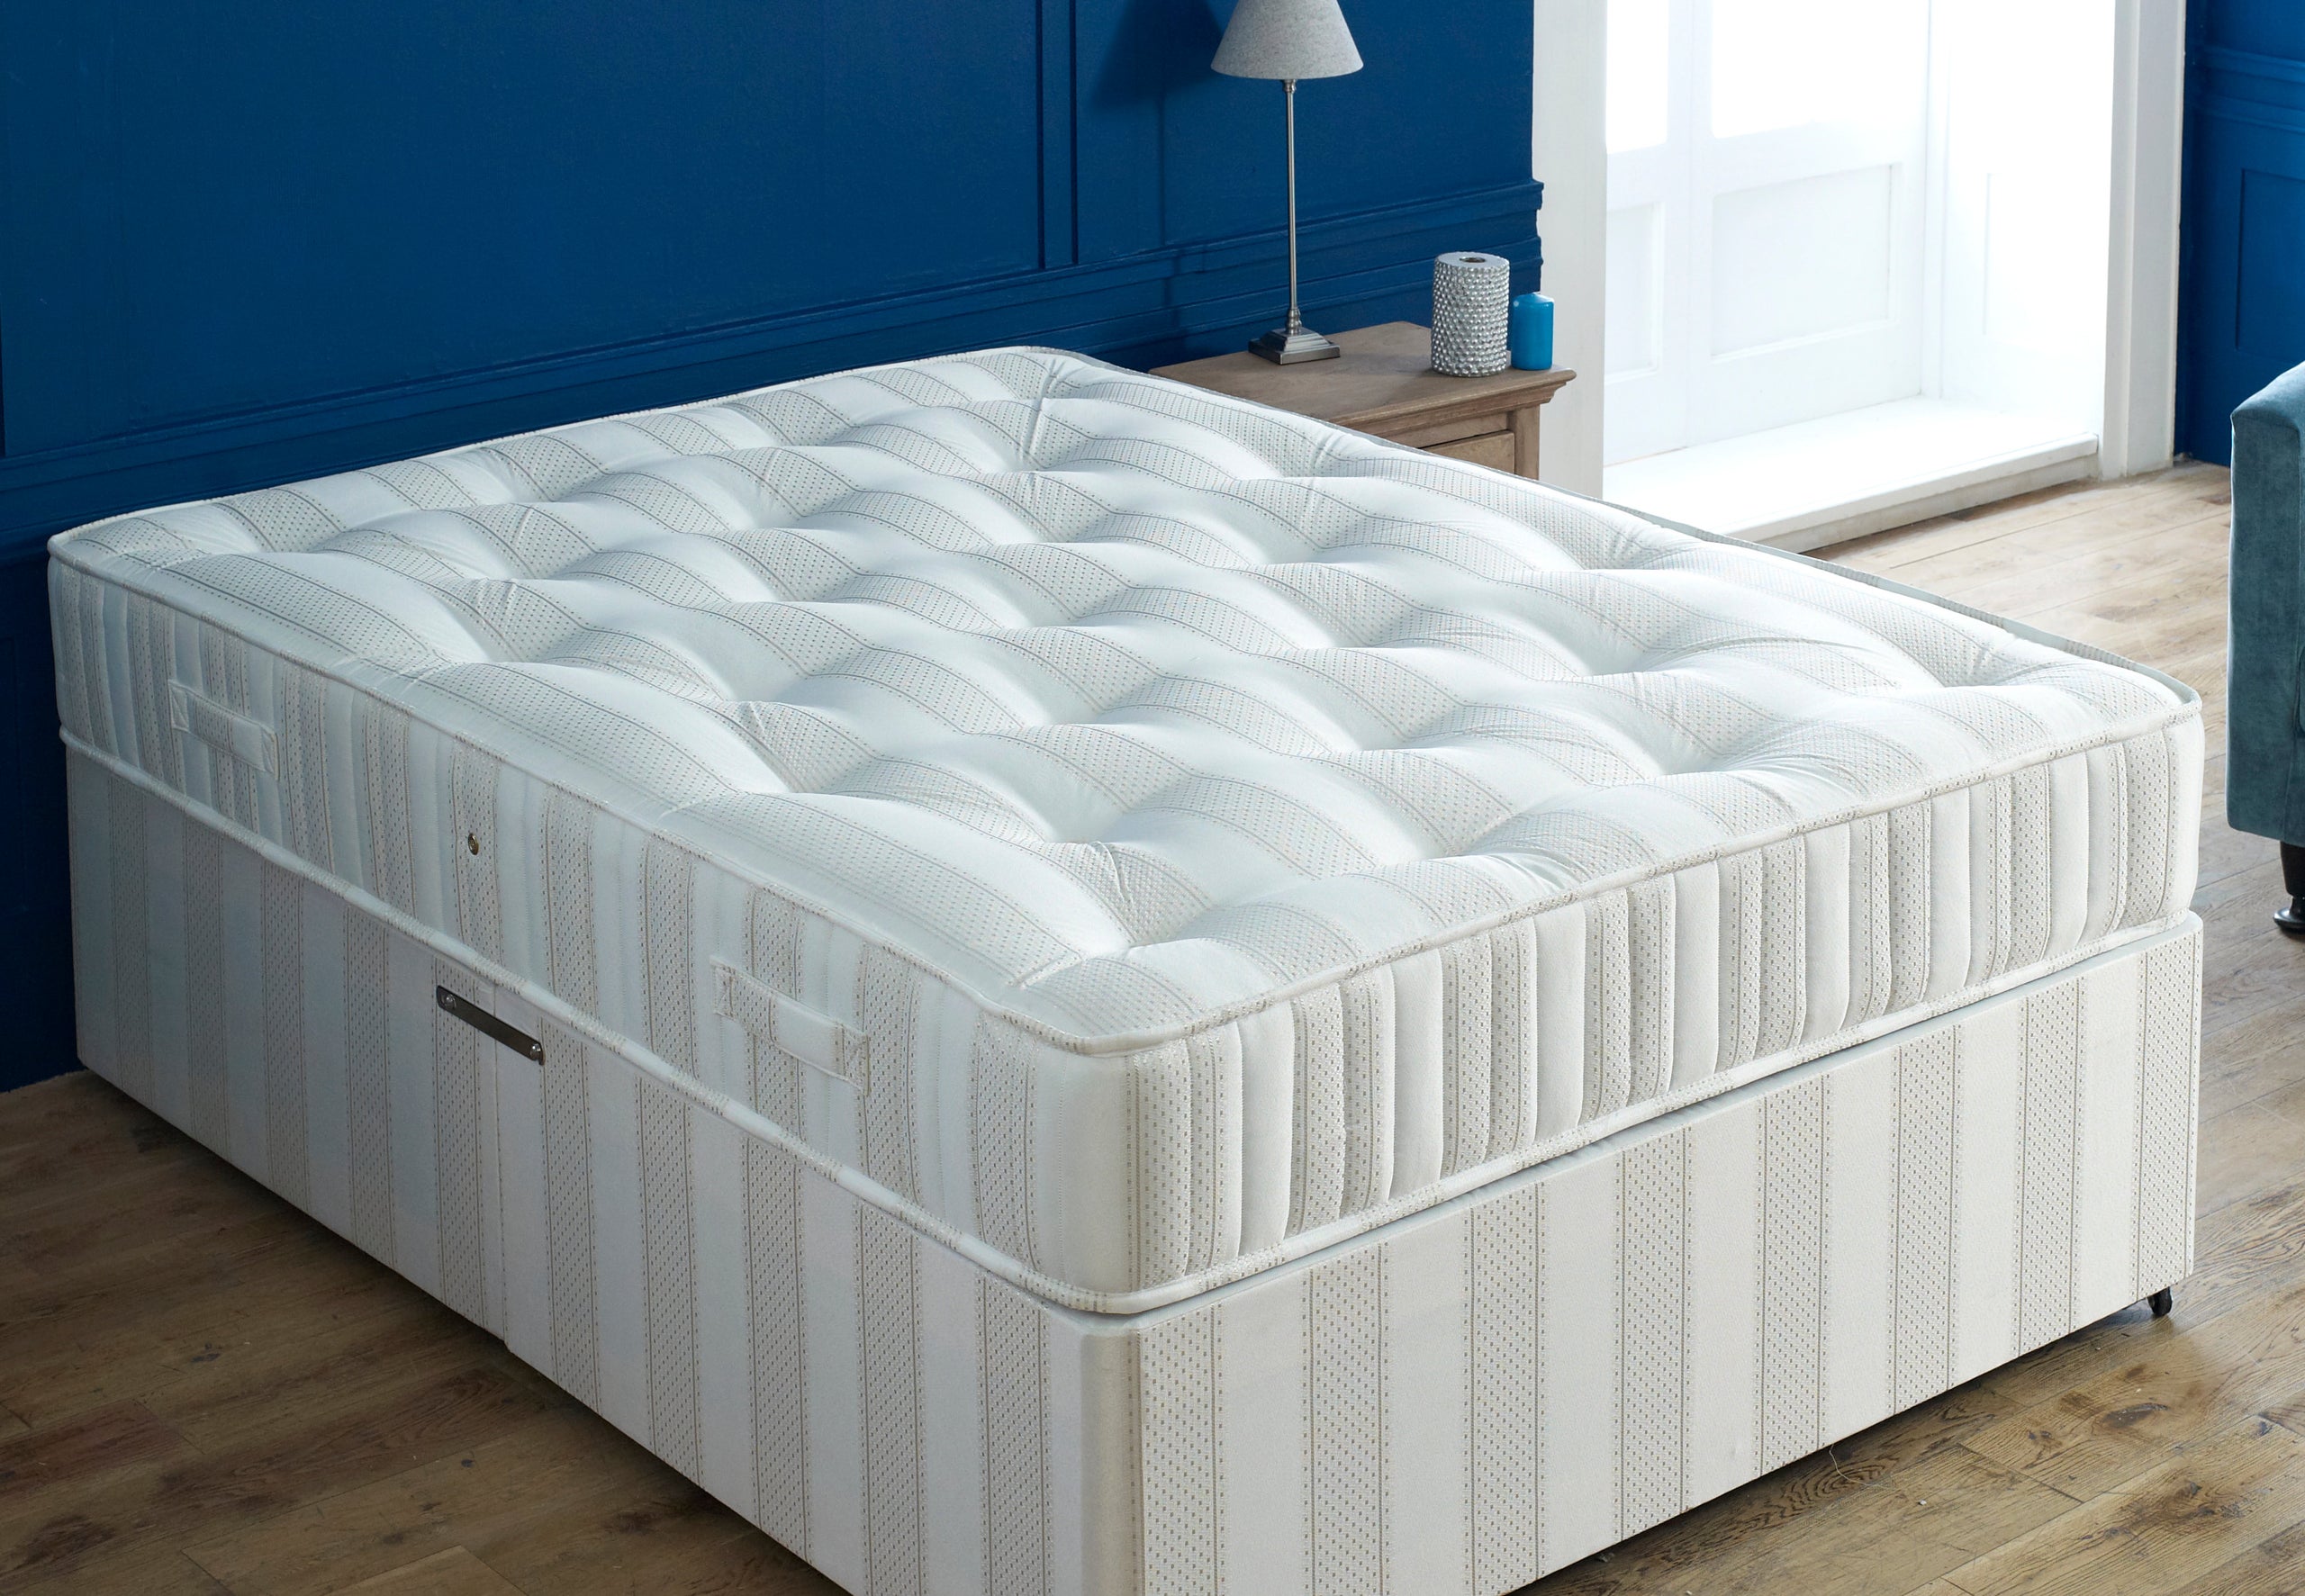 orthopaedic beds and mattresses